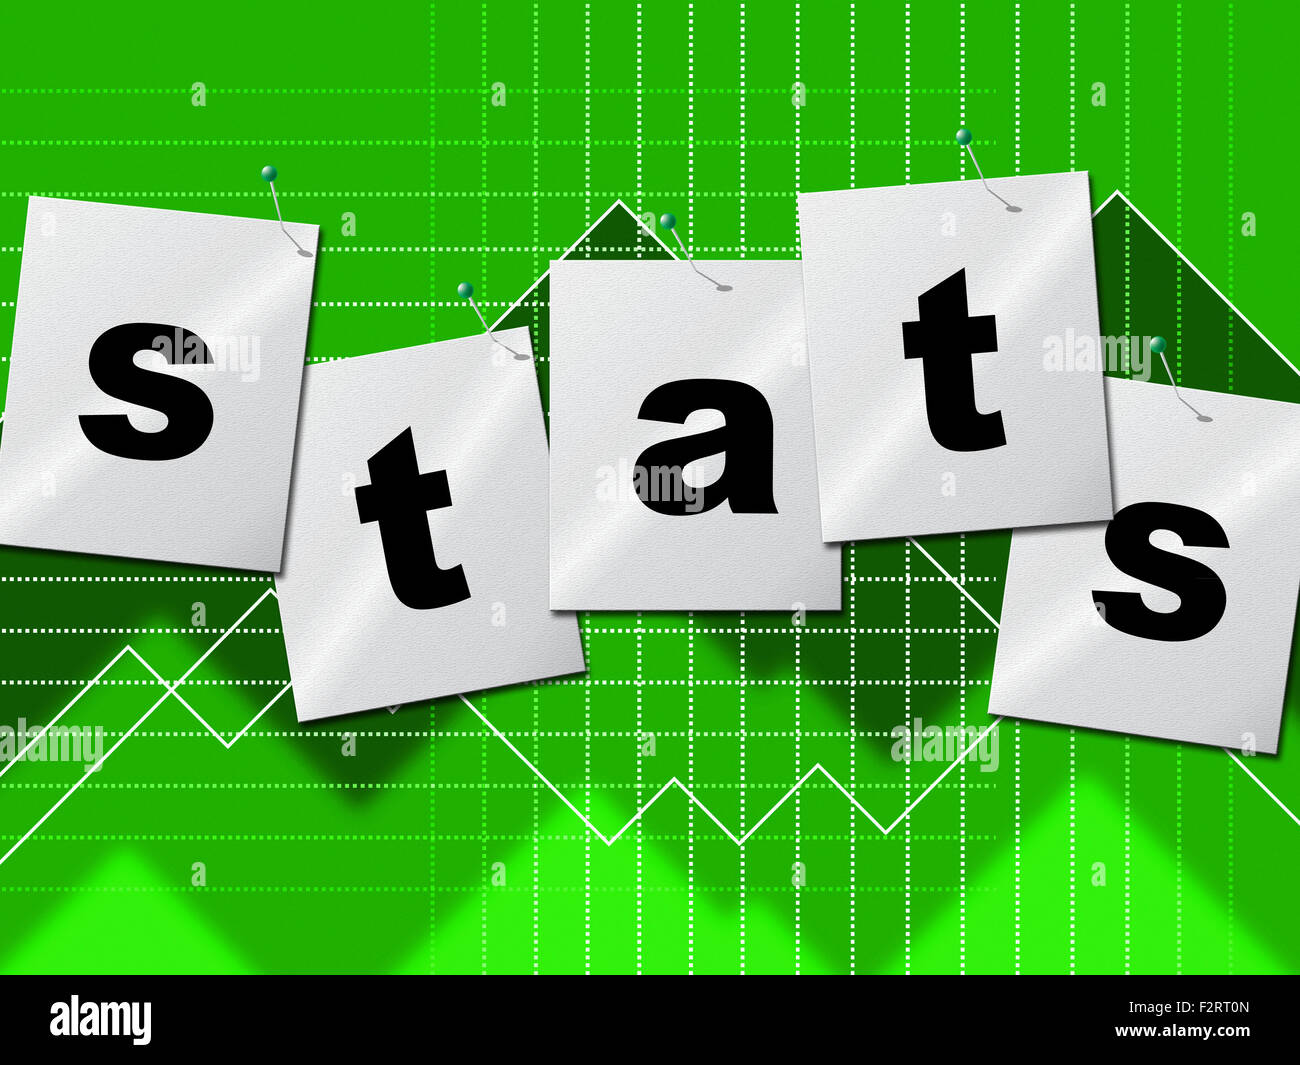 Stats Data Representing Statistical Analysis And Facts Stock Photo